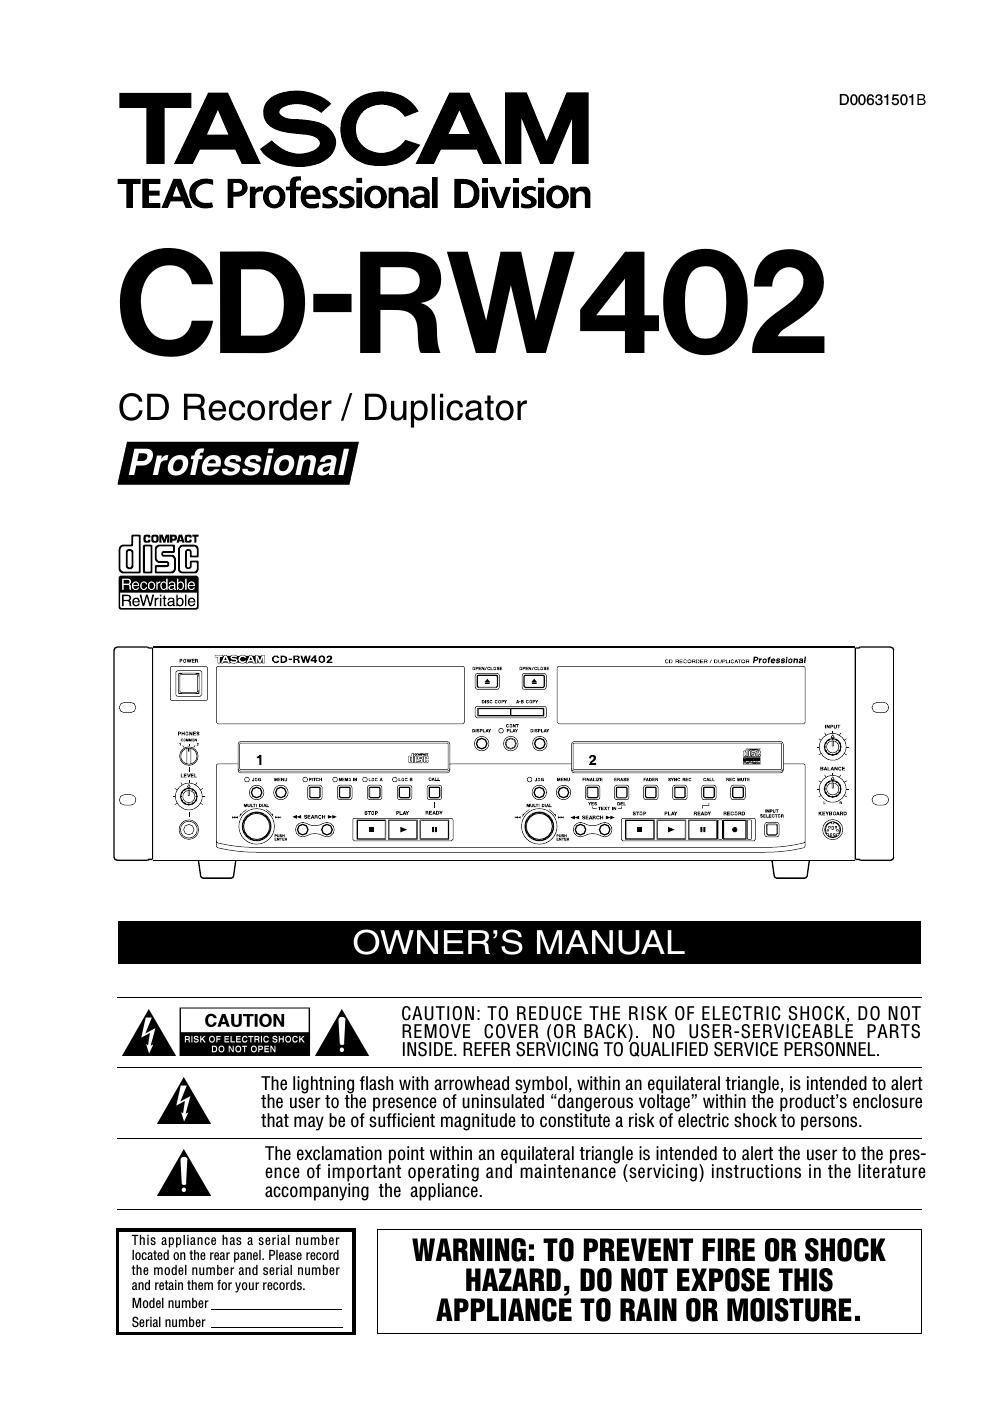 Tascam CD RW 402 Owners Manual